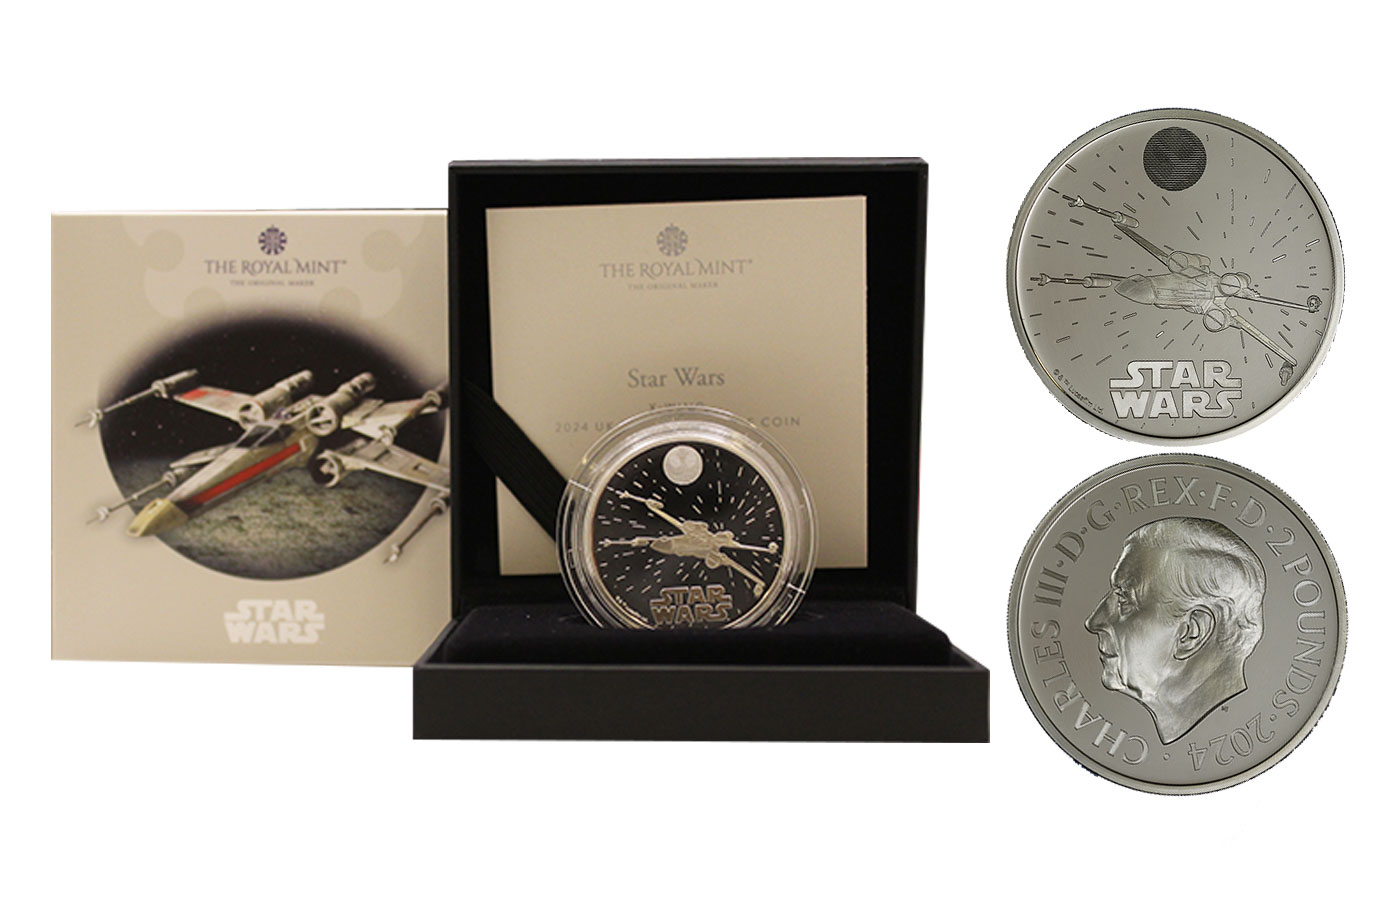 "Star Wars: X-wing" - Re Carlo III - 2 Pounds gr. 31,21 in arg. 999/ - Tiratura 3000 pezzi